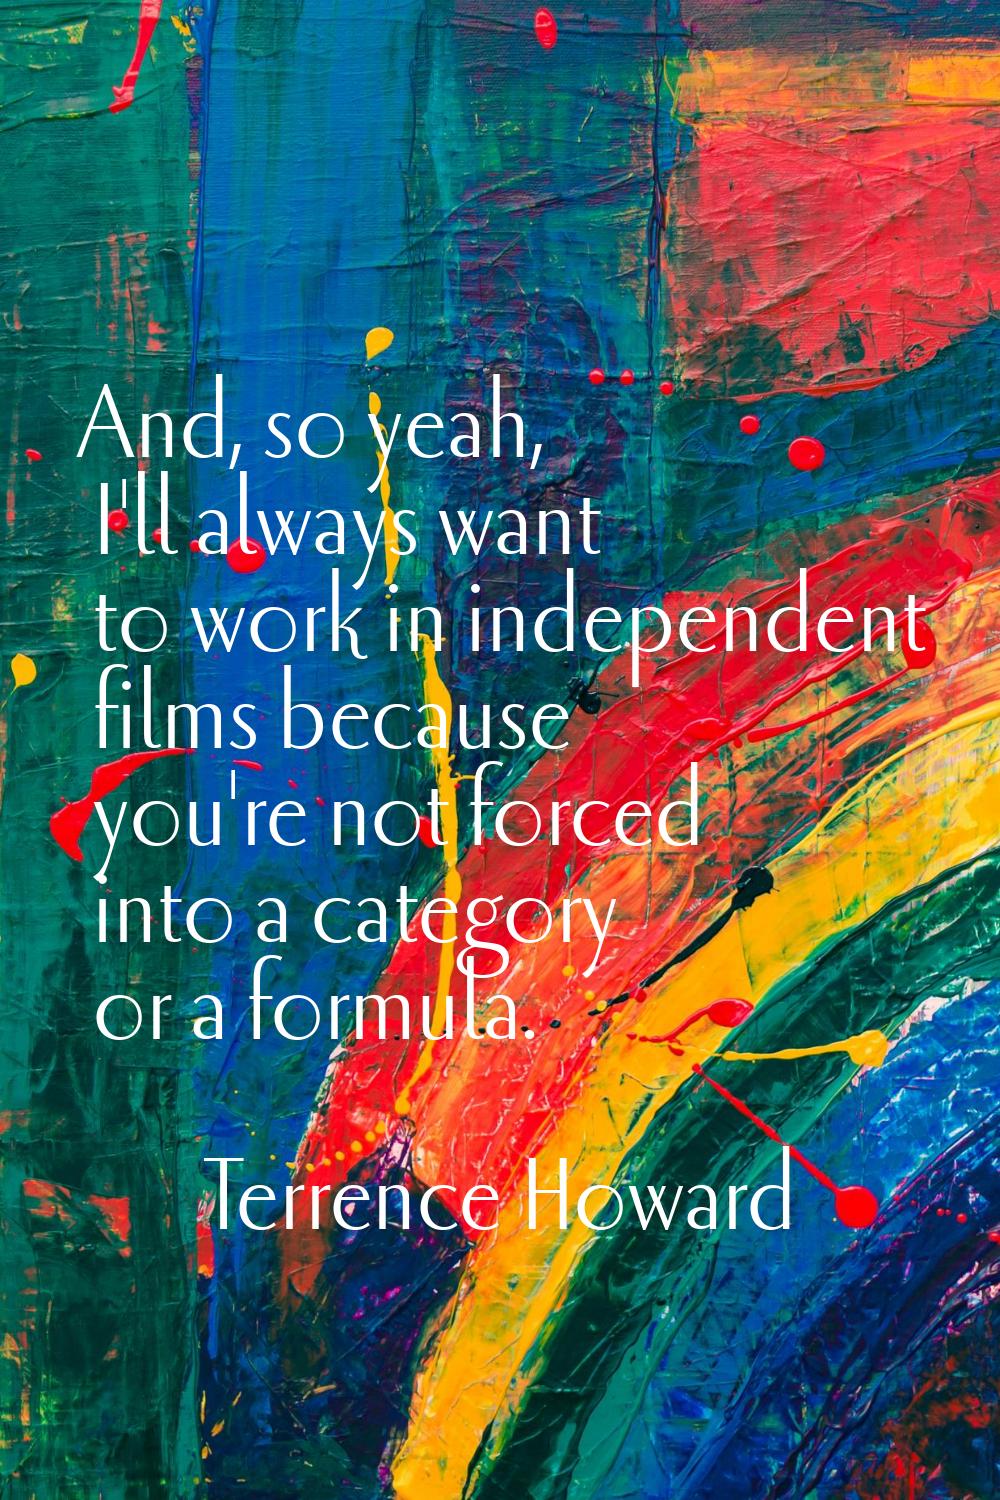 And, so yeah, I'll always want to work in independent films because you're not forced into a catego